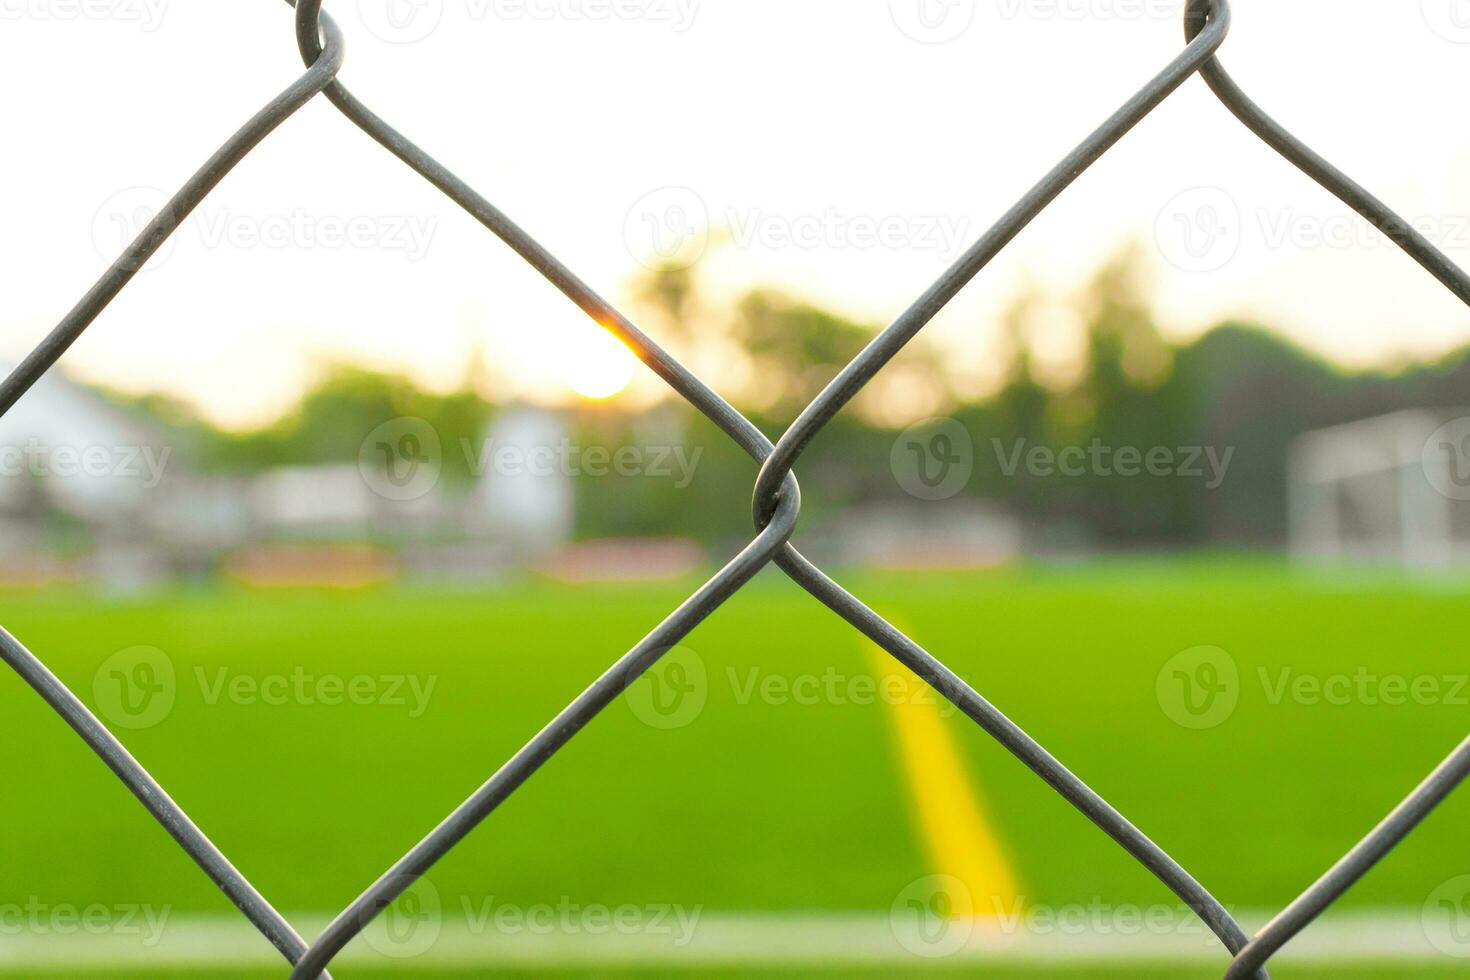 A soccer field view from outside the fence, focusing on the fence. After some edits. photo